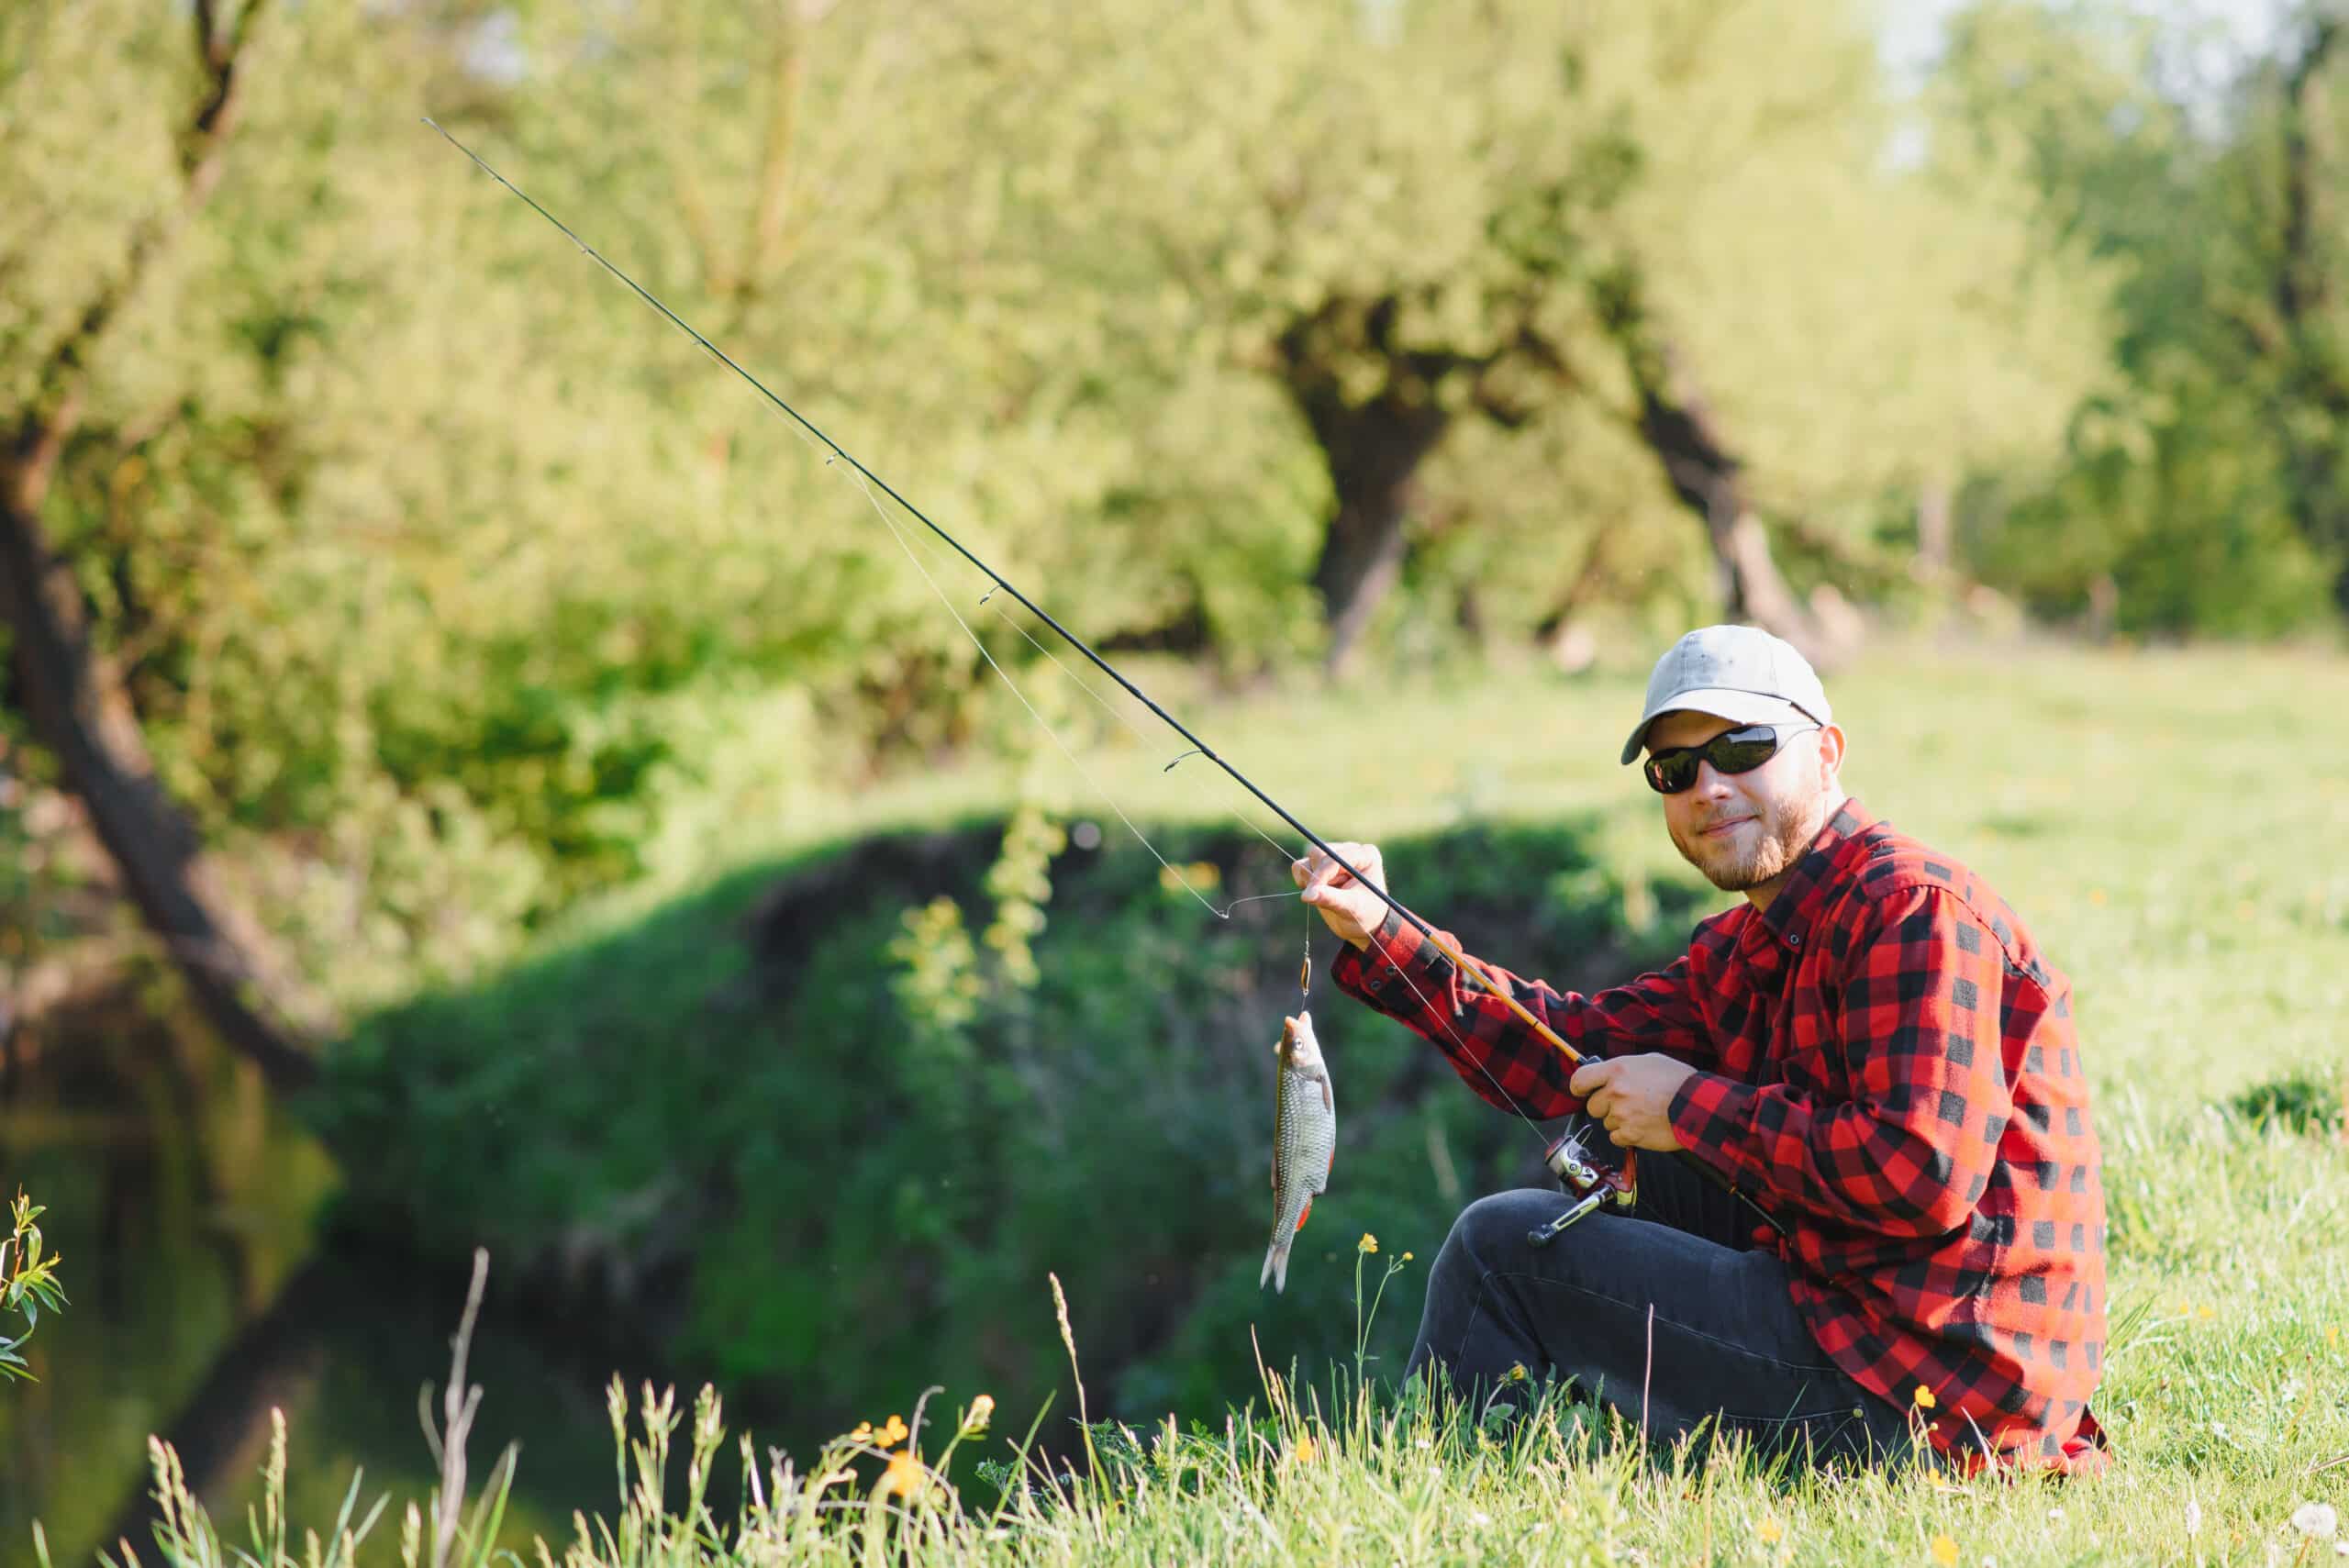 fanatic4fishing.com : What is the best way to catch fish in a lake?